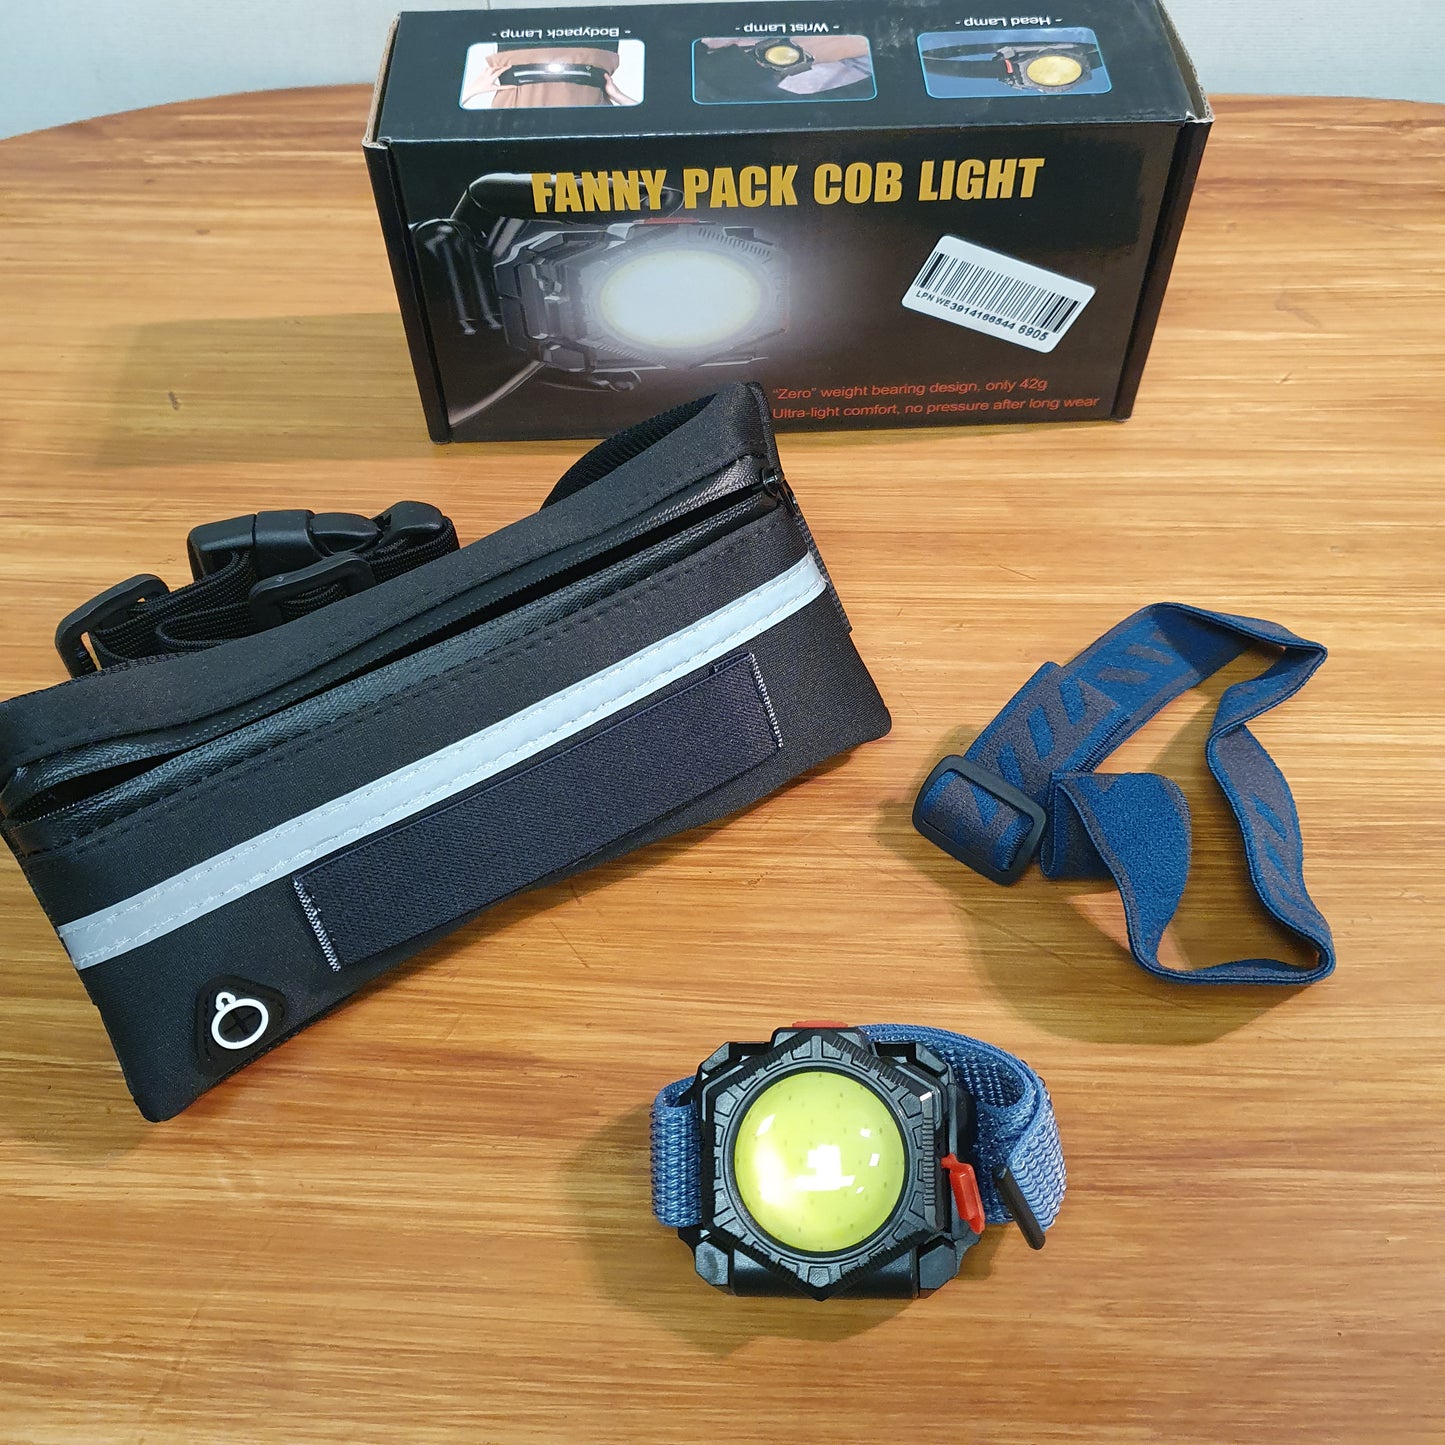 Multifunctional LED Headlamp USB Rechargeable COB Work Light Waterproof Headlight Fanny Pack Lamp for Fishing